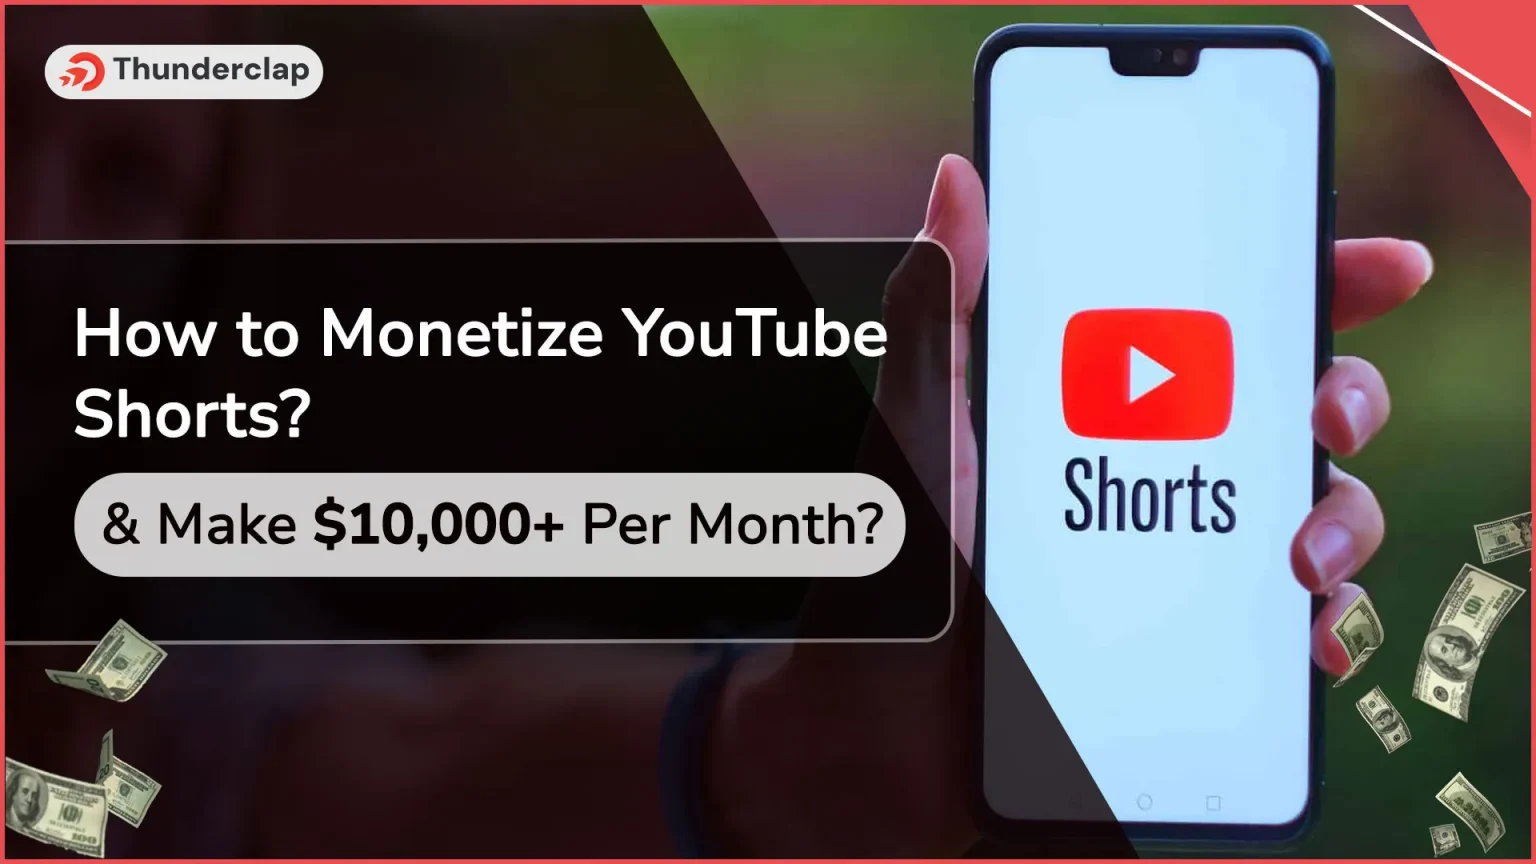 How To Monetize YouTube Shorts